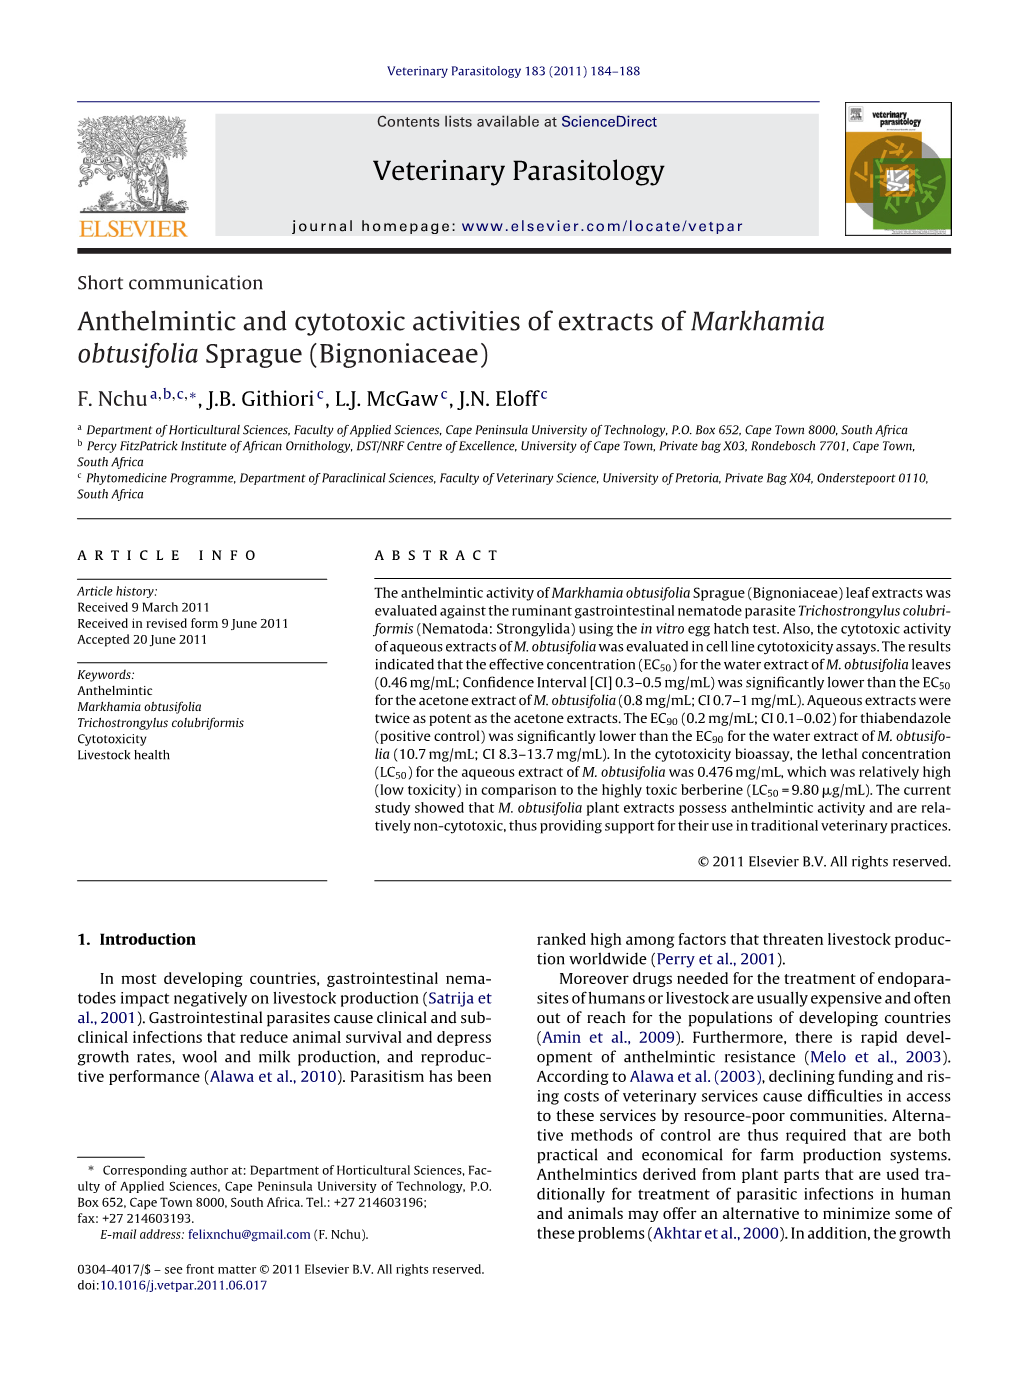 Anthelmintic and Cytotoxic Activities of Extracts of Markhamia Obtusifolia Sprague (Bignoniaceae)